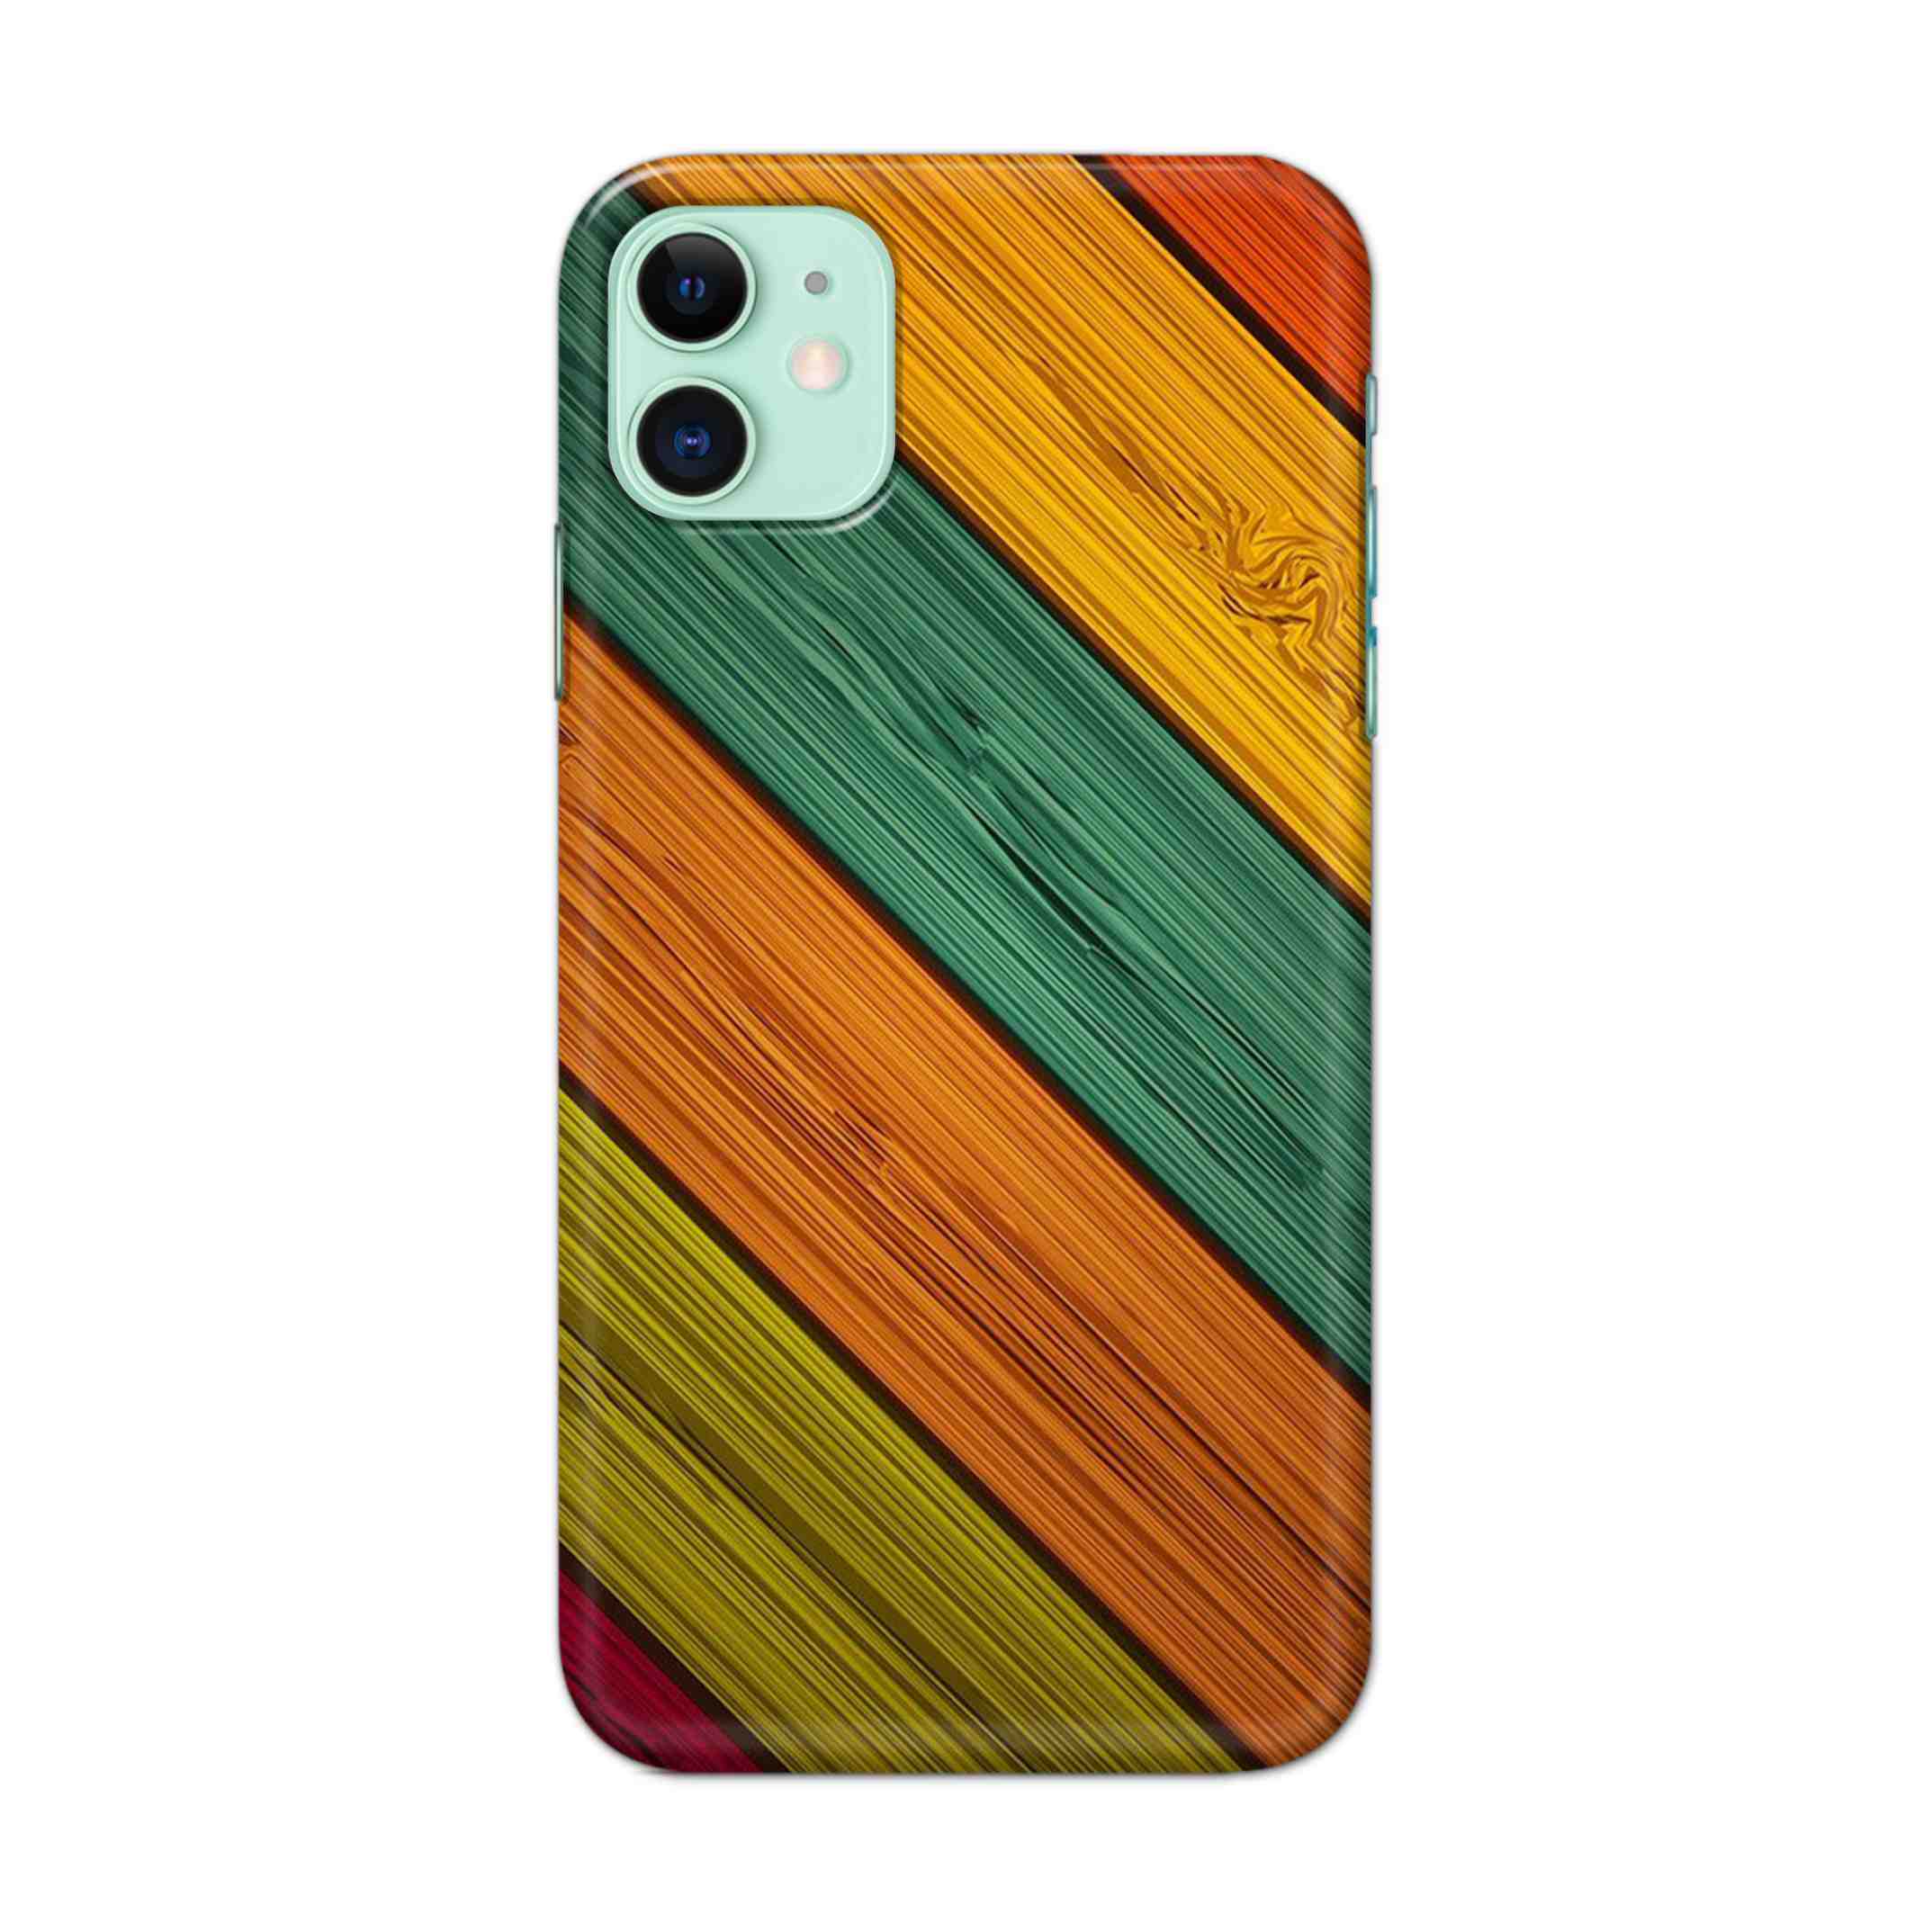 Buy Texture Hard Back Mobile Phone Case Cover For iPhone 11 Online